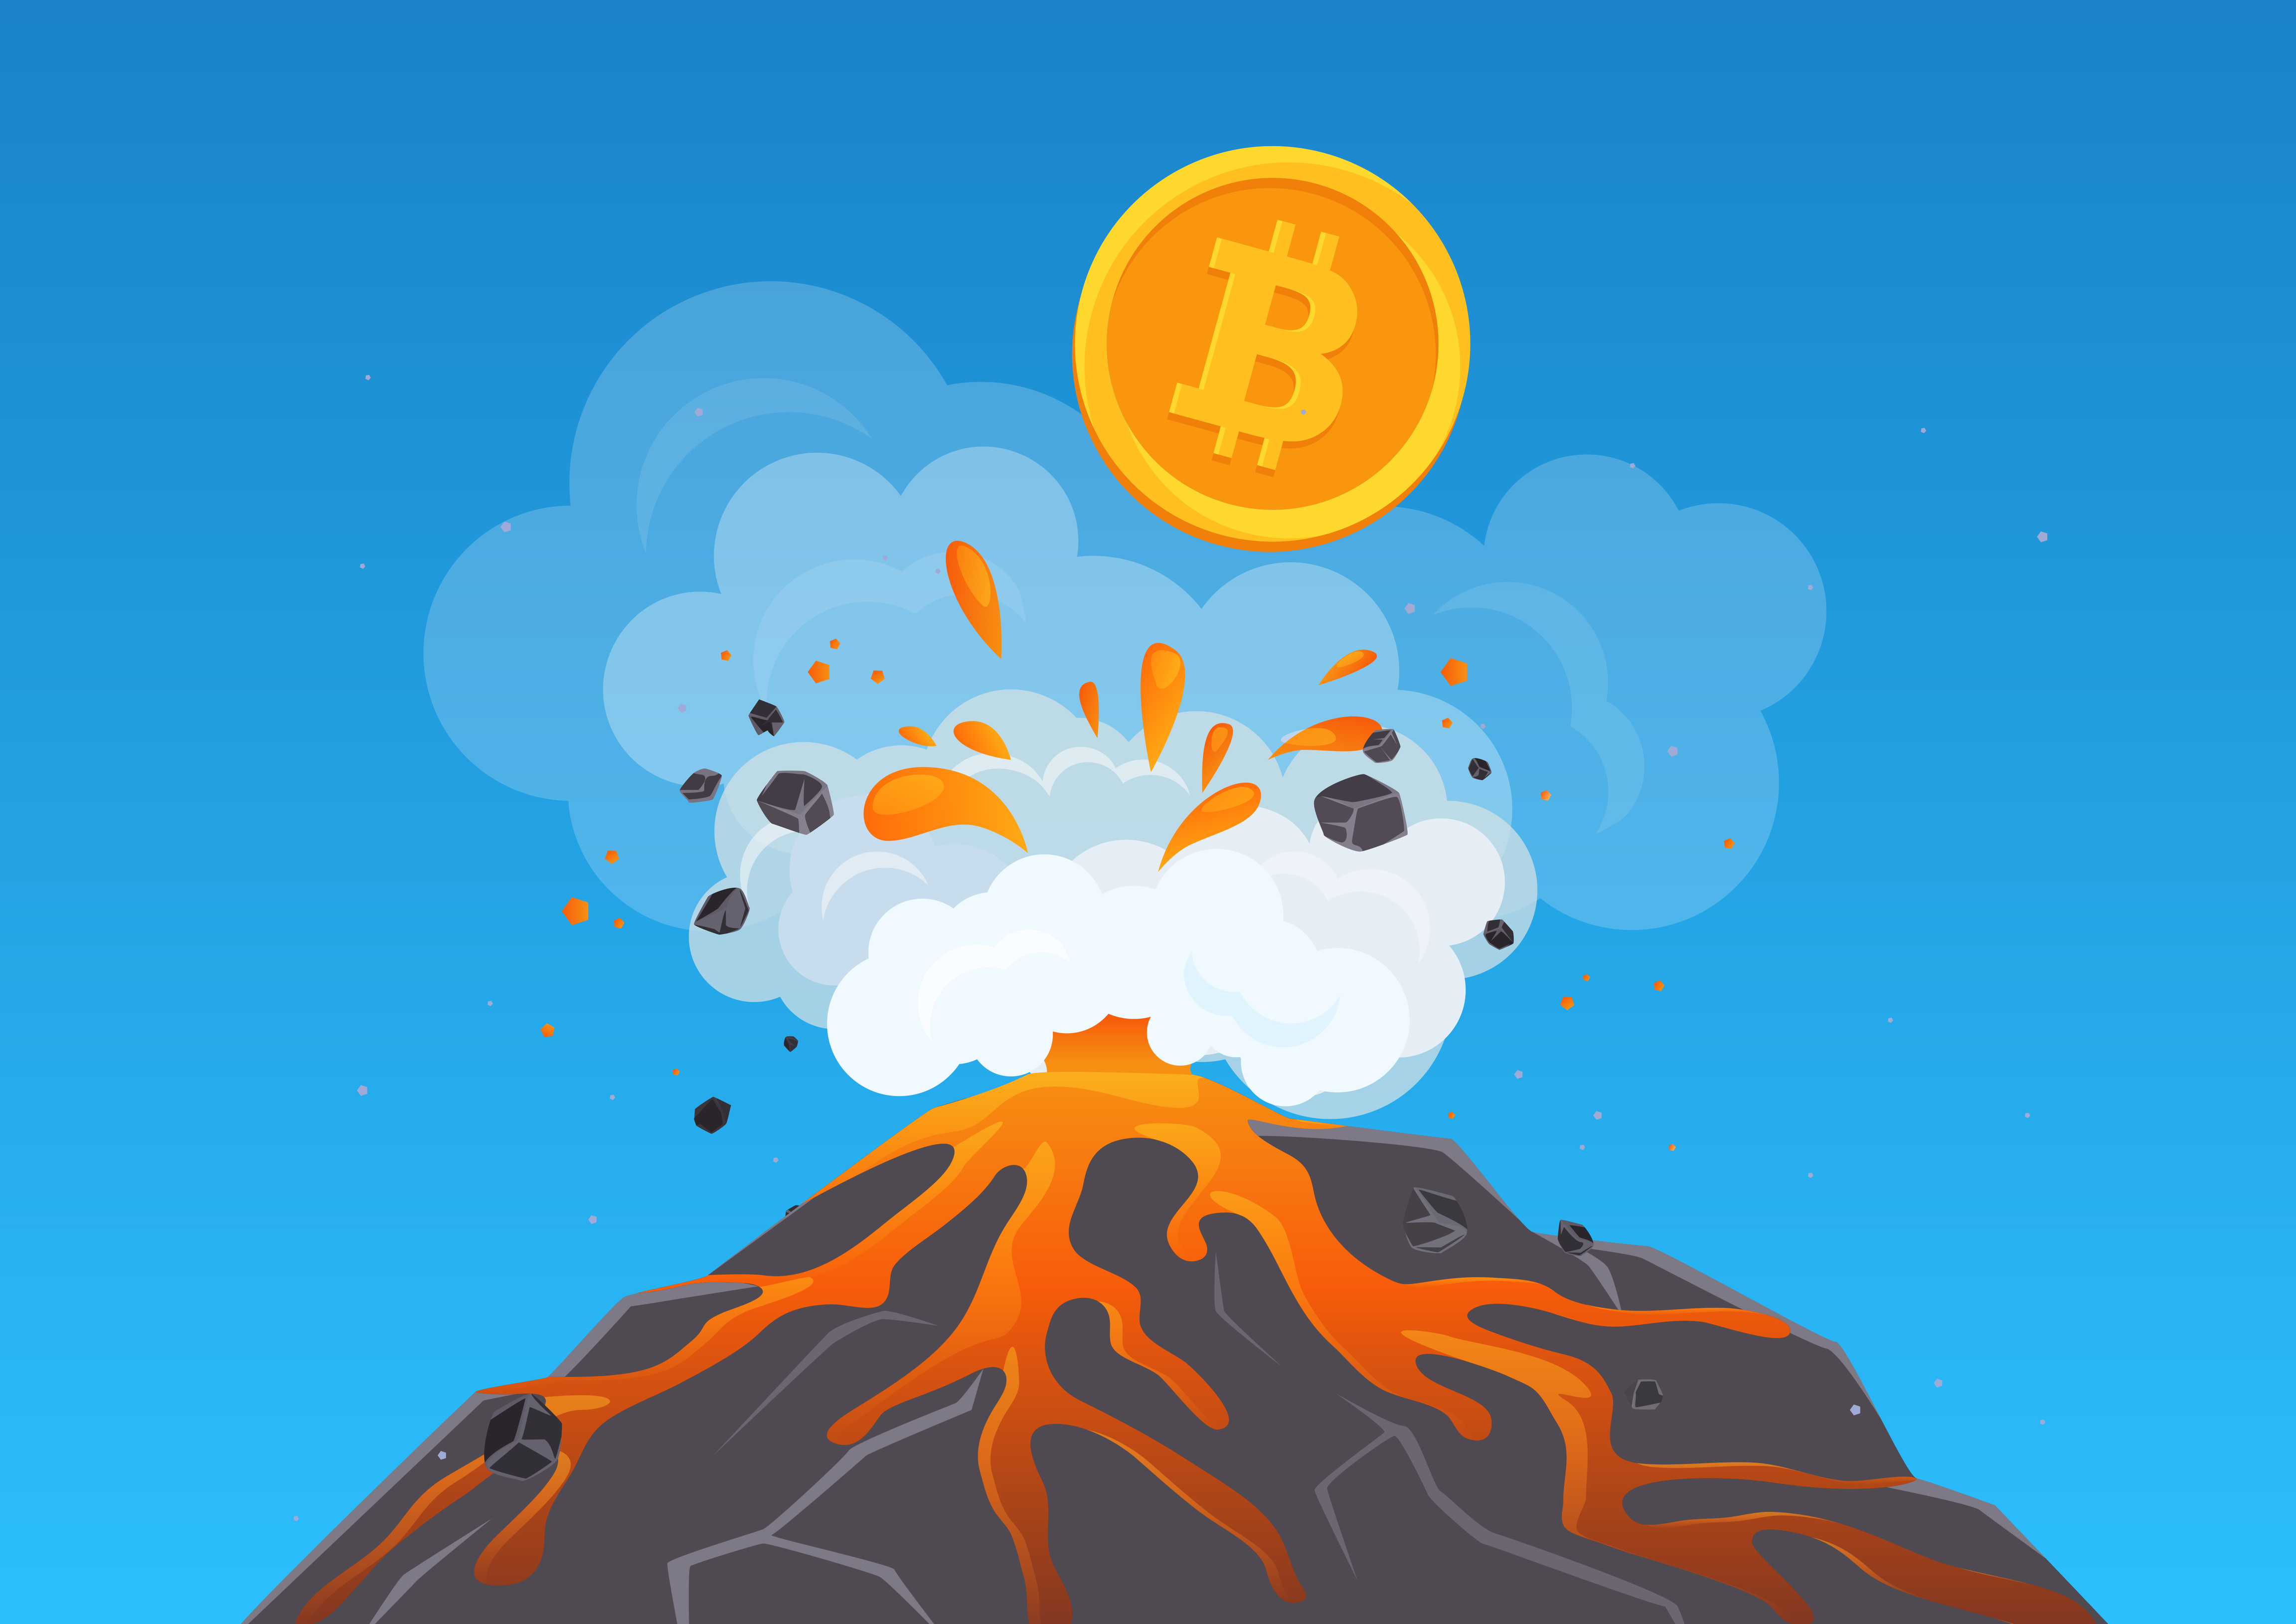 An image of a volcano Lava Pool and Bitcoin